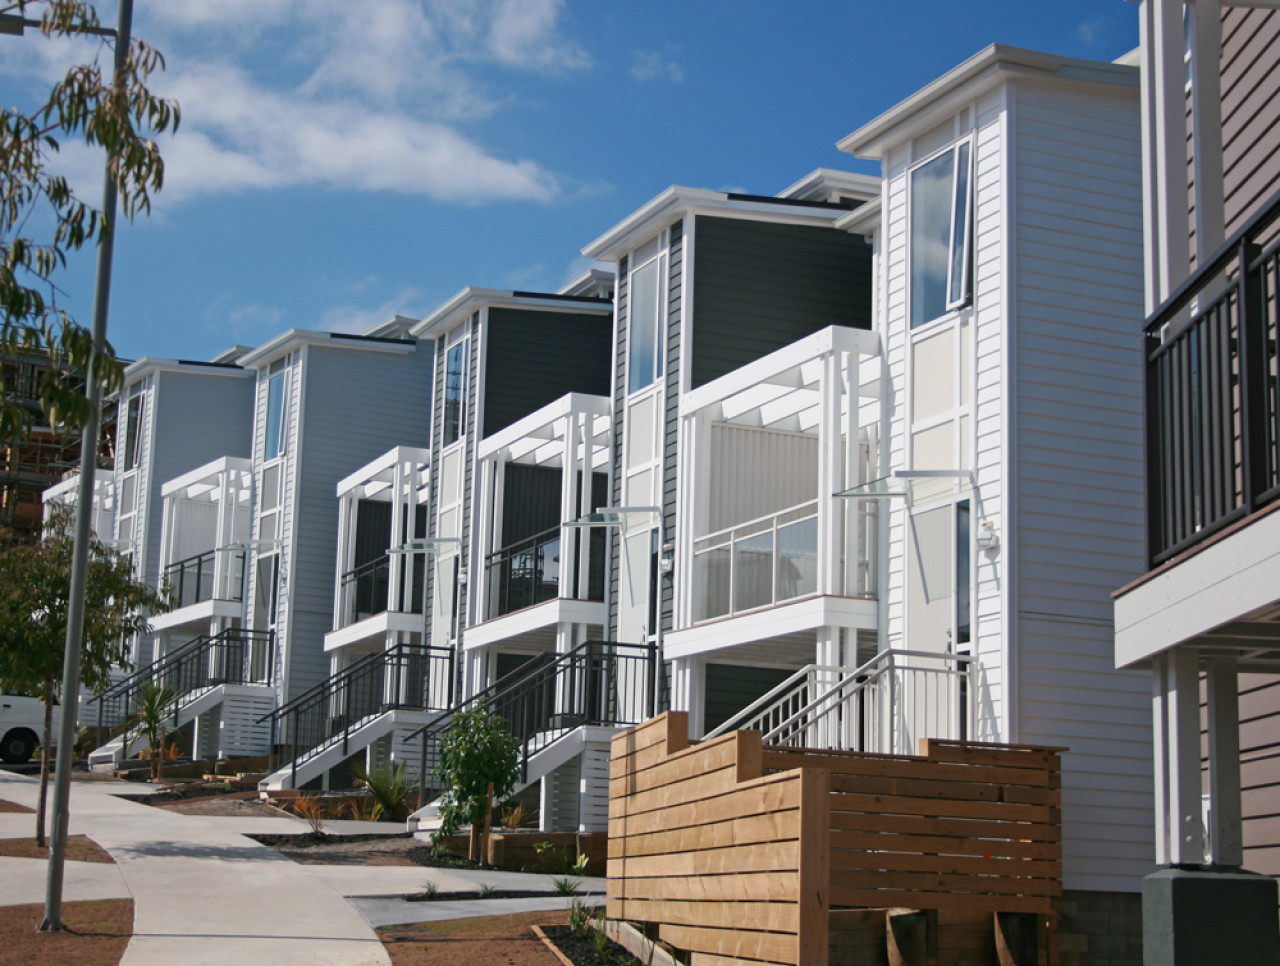 Main street residential housing showing Edge balustrade canopy and louvre screesn